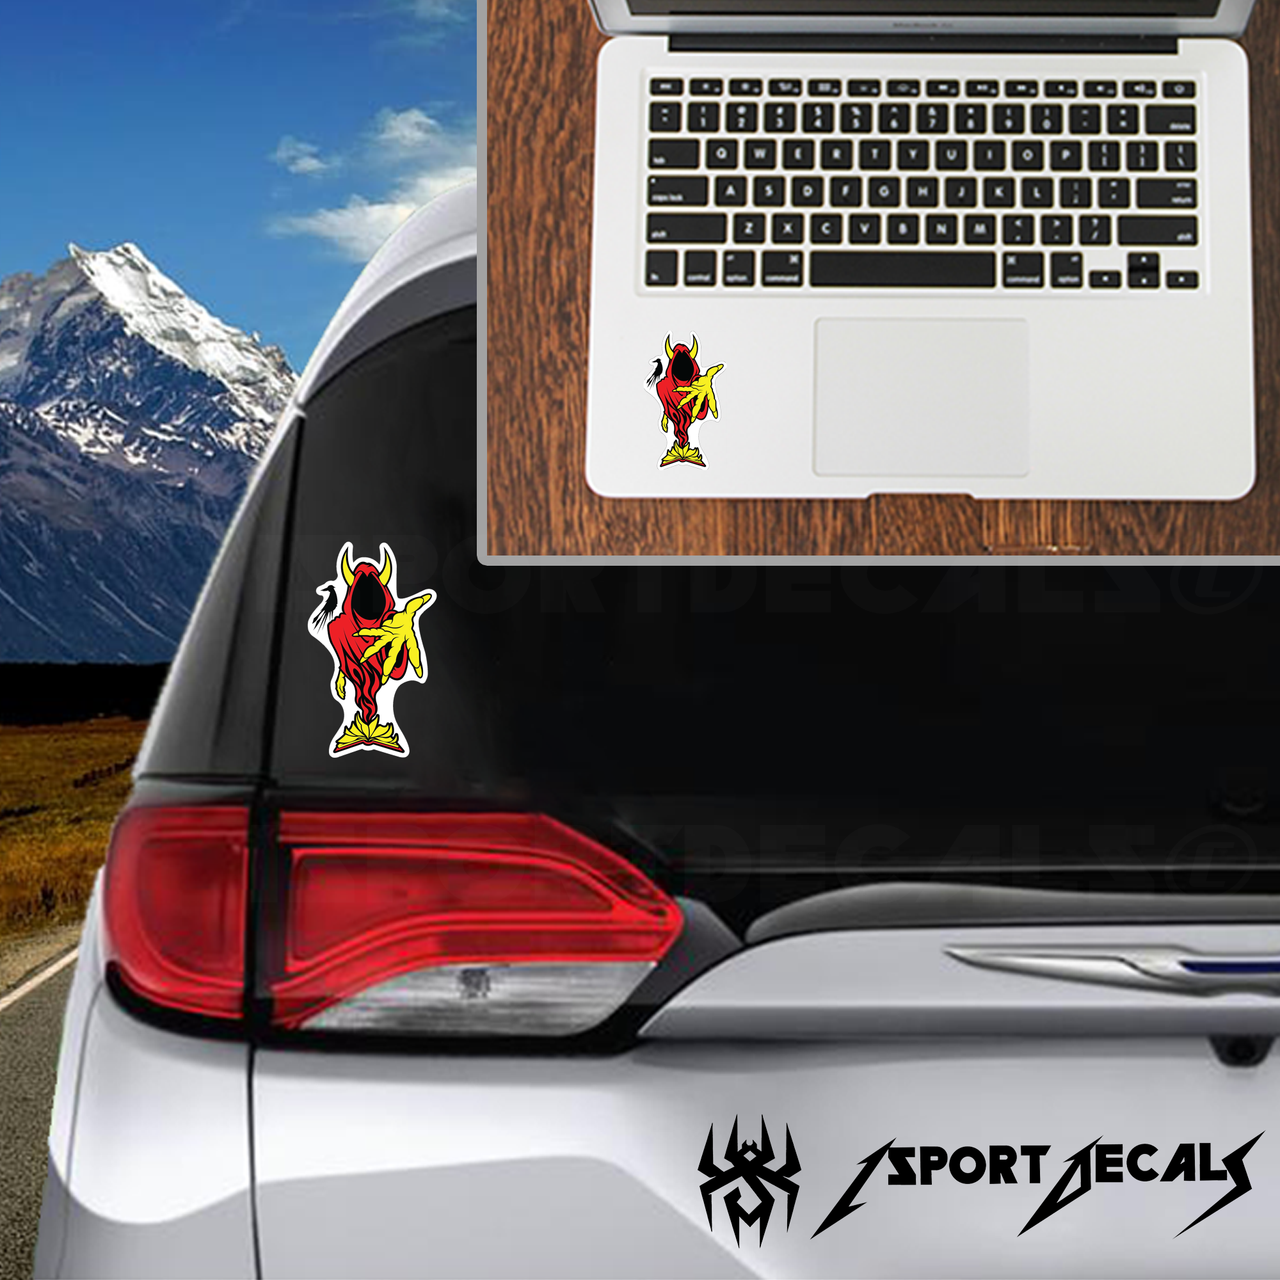 Grey Goose Logo - 5 Inch Sticker Graphic - Auto Wall Laptop Cell phone  Bumper Window Decal Sticker